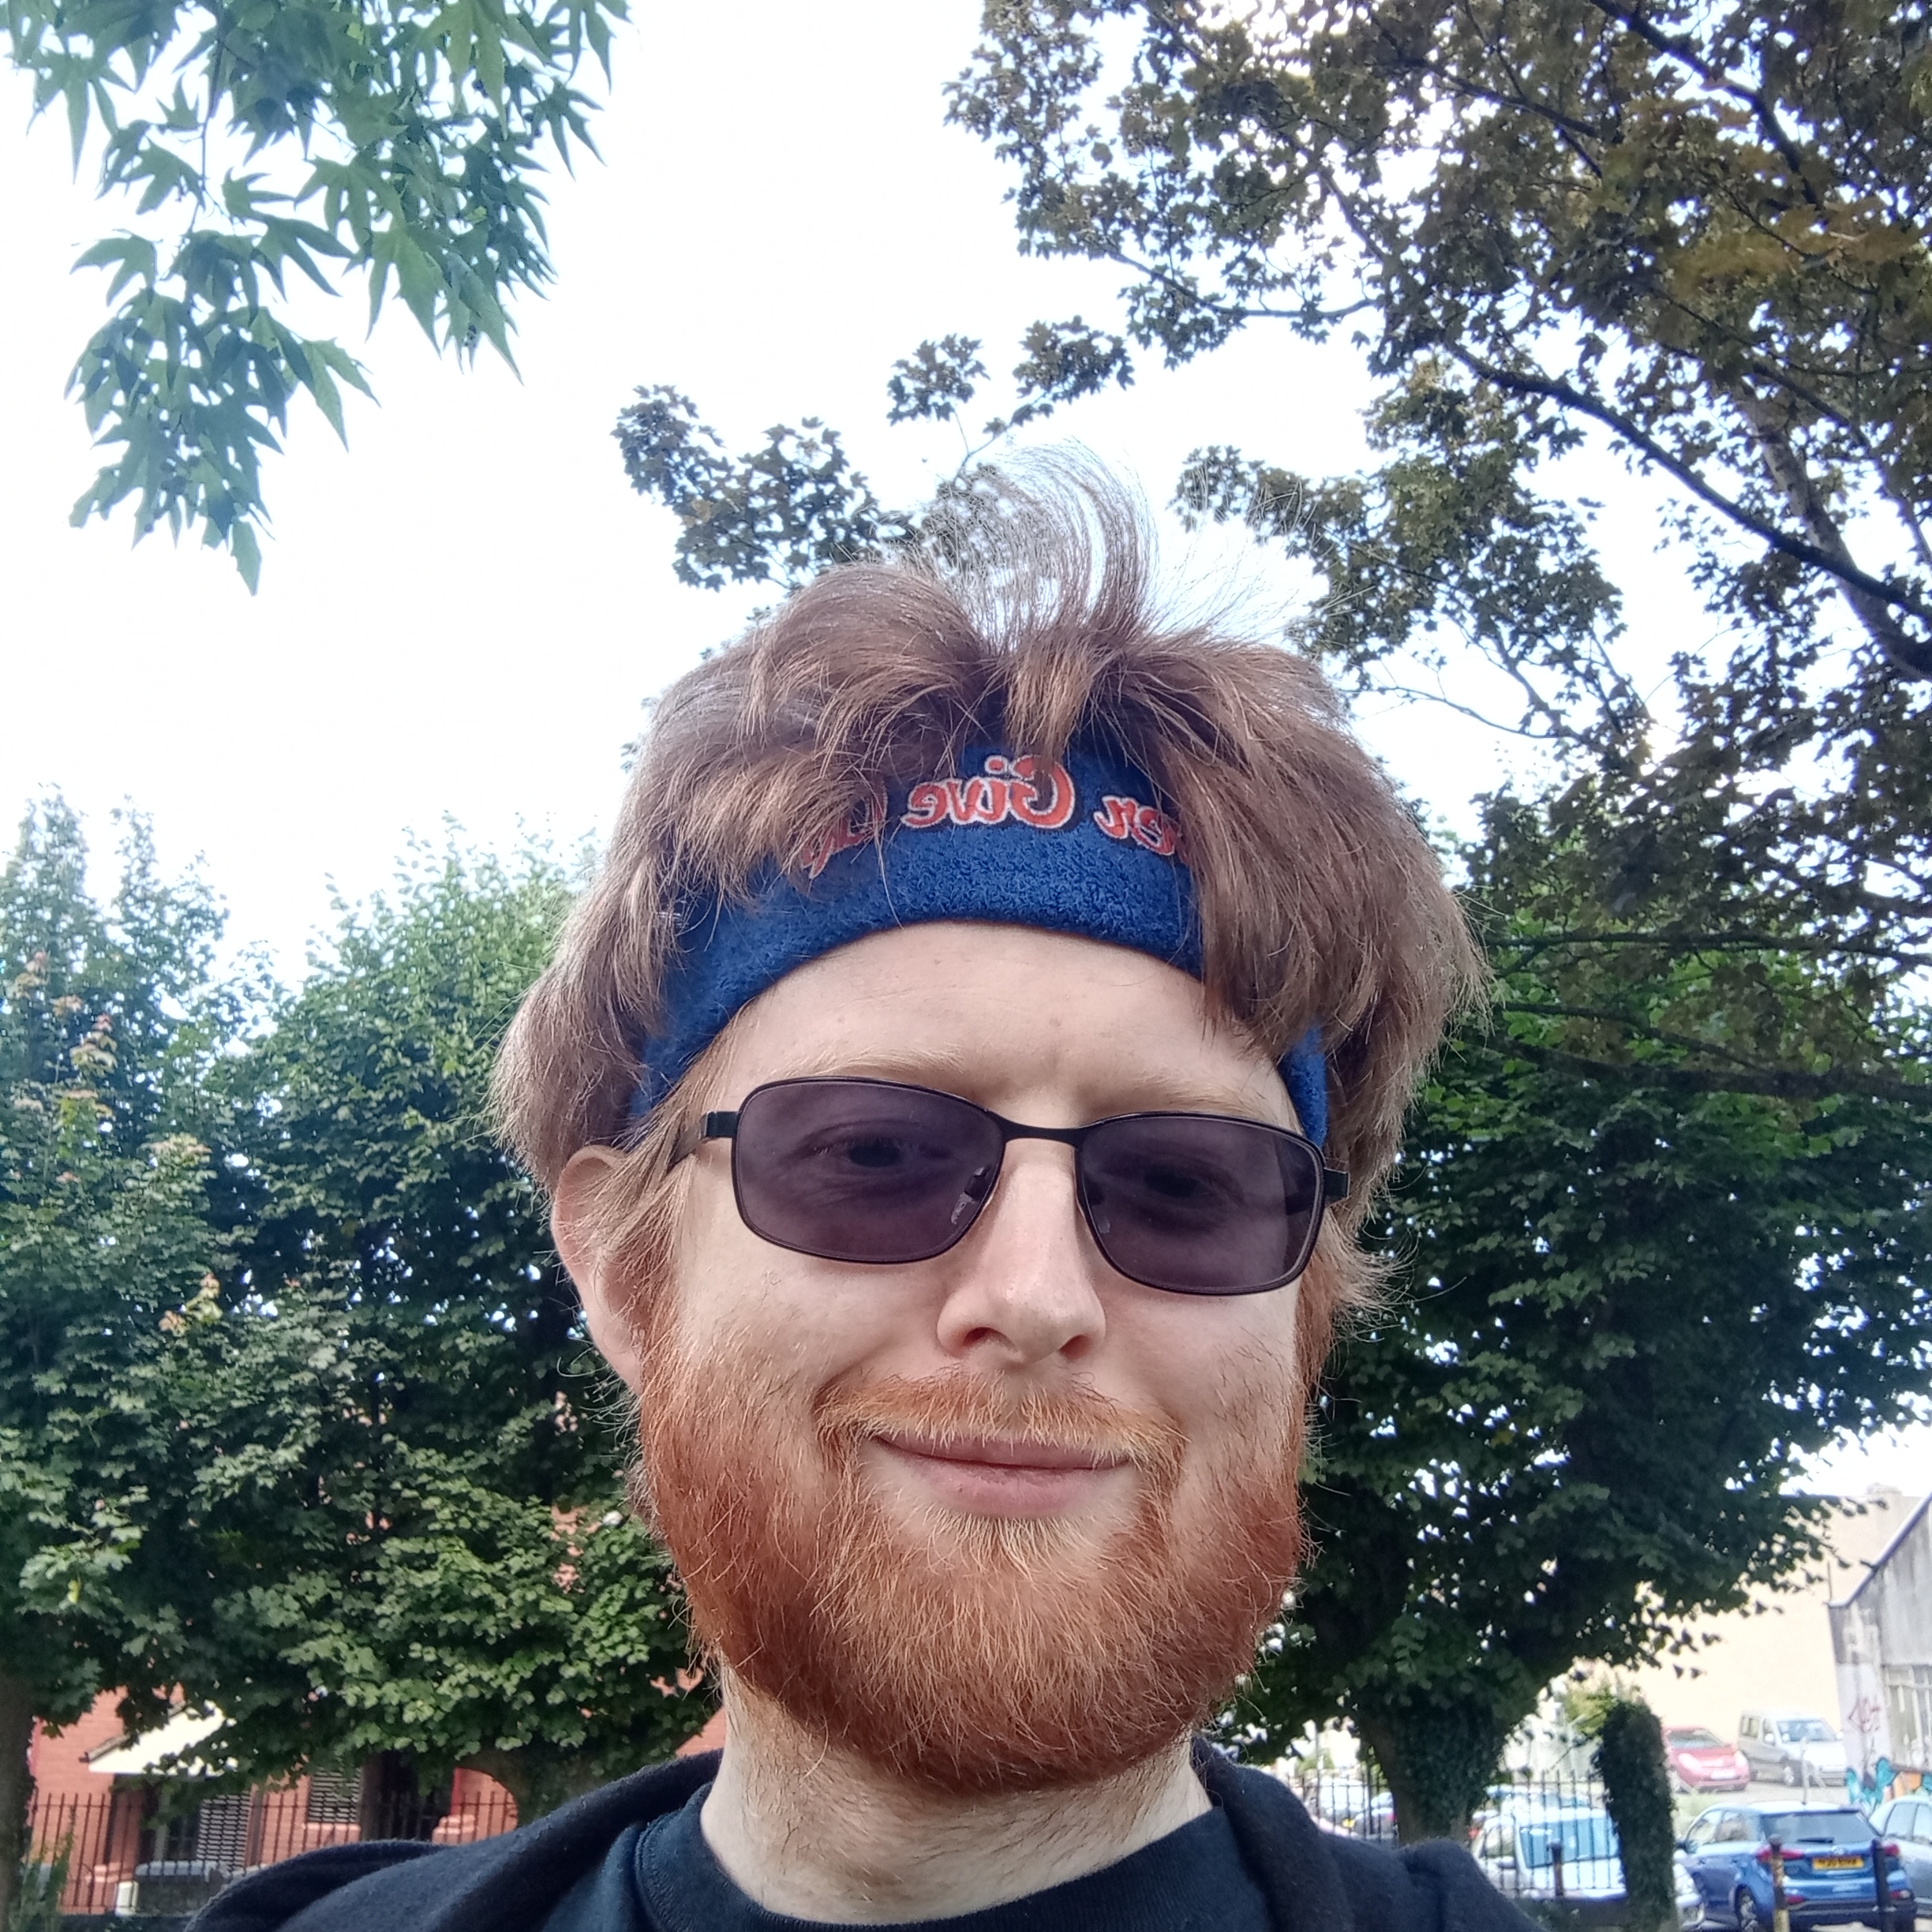 Here's the selfie camera. Ignore the headband, lockdown hair must be managed.